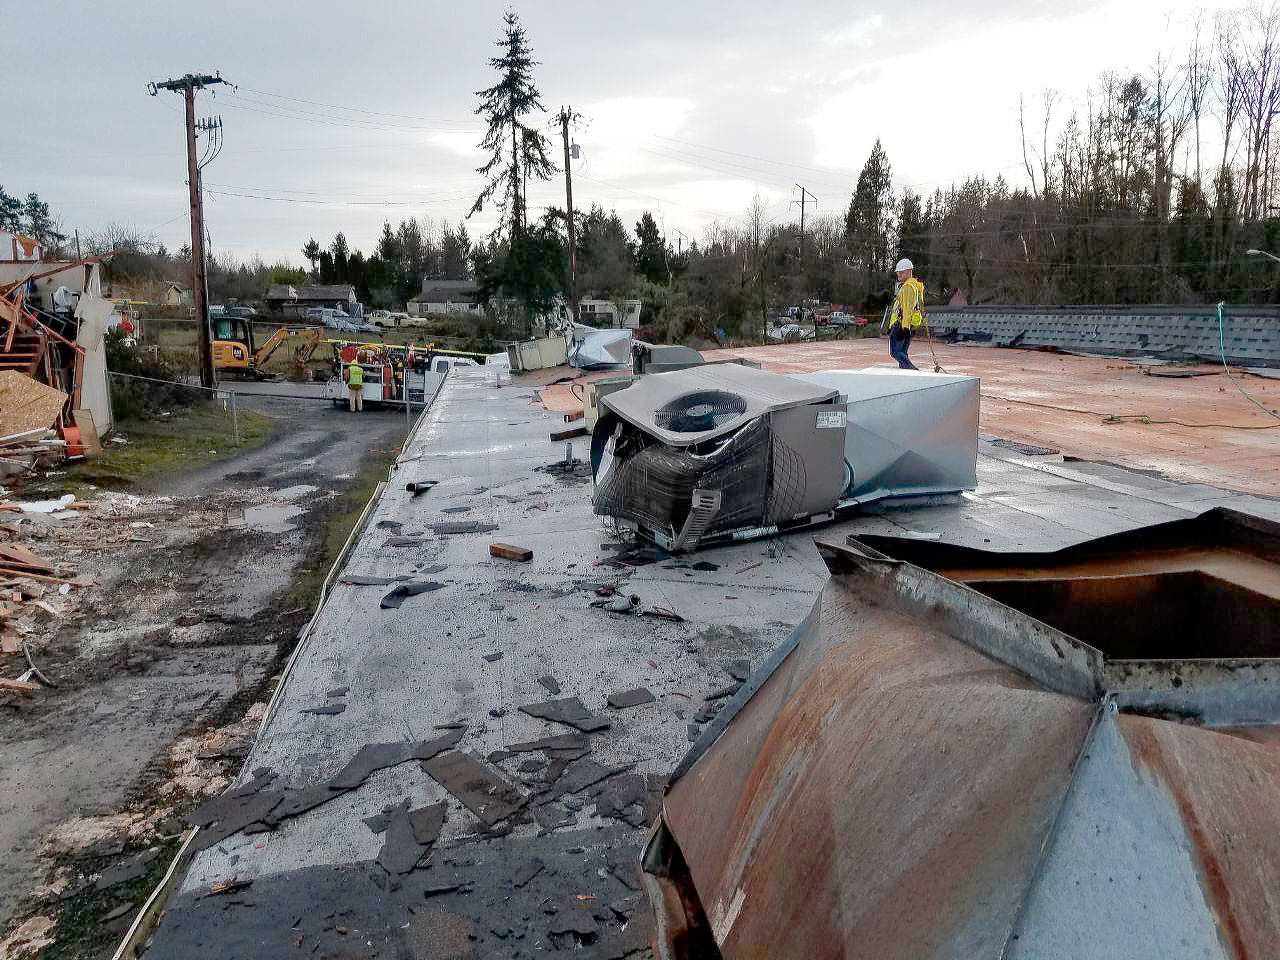 The Port Orchard tornado inflicted severe damage to the Bethel Square building structure, damaging heat and cooling units, and tearing off signage. (Shari Patrick photo)